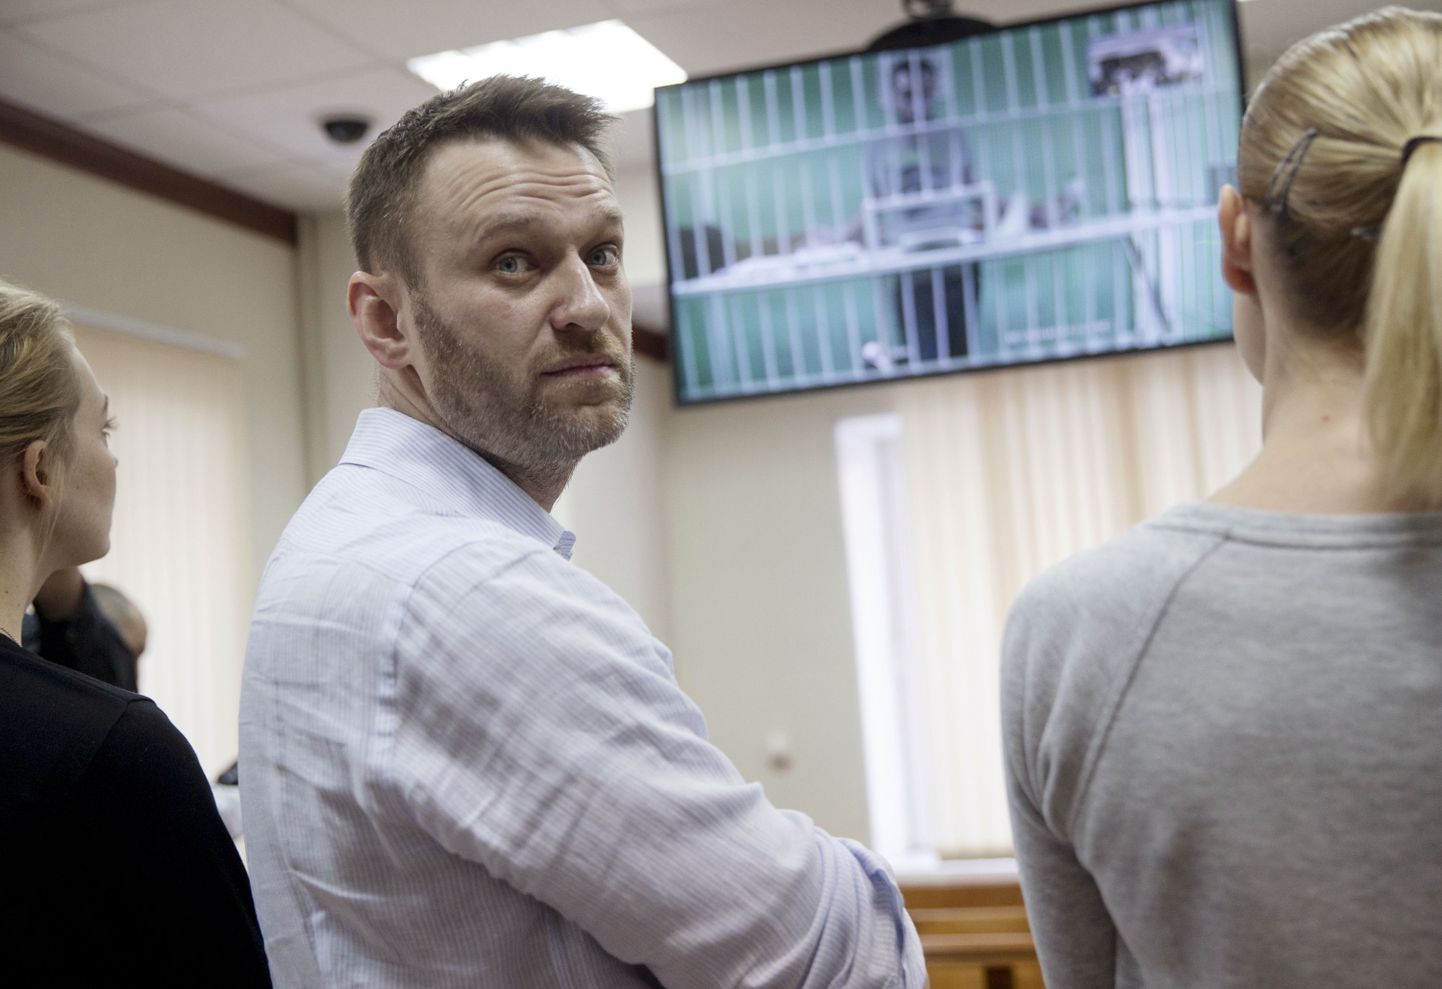 Russian opposition activist and anti-corruption crusader Alexei Navalny, center, his wife Yulia, left, and his brother Oleg's wife Victoria attend a video call with Oleg, shown on a TV screen, at a court in Moscow, Russia, Tuesday, Feb. 17, 2015. Oleg Navalny was convicted on Dec. 30, 2014 and sentenced for three and a half years. Alexei Navalny was also convicted and sentenced to the same prison term, but it was suspended. (AP Photo/Pavel Golovkin)